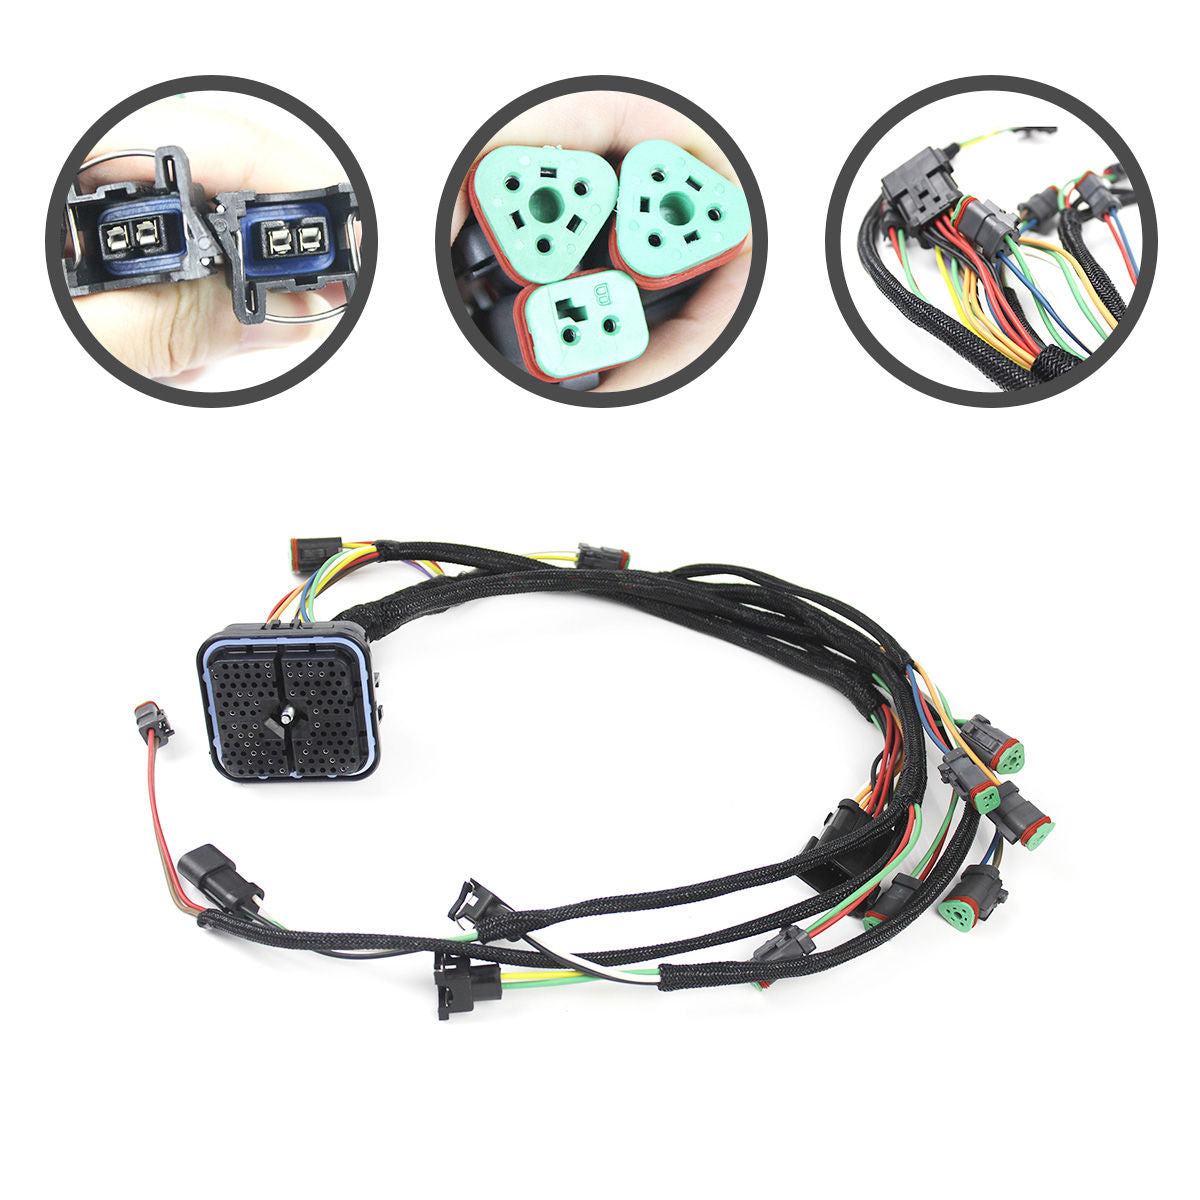 1982713 198-2713 Engine Wiring Harness for CAT E325D C7 Engine - Sinocmp